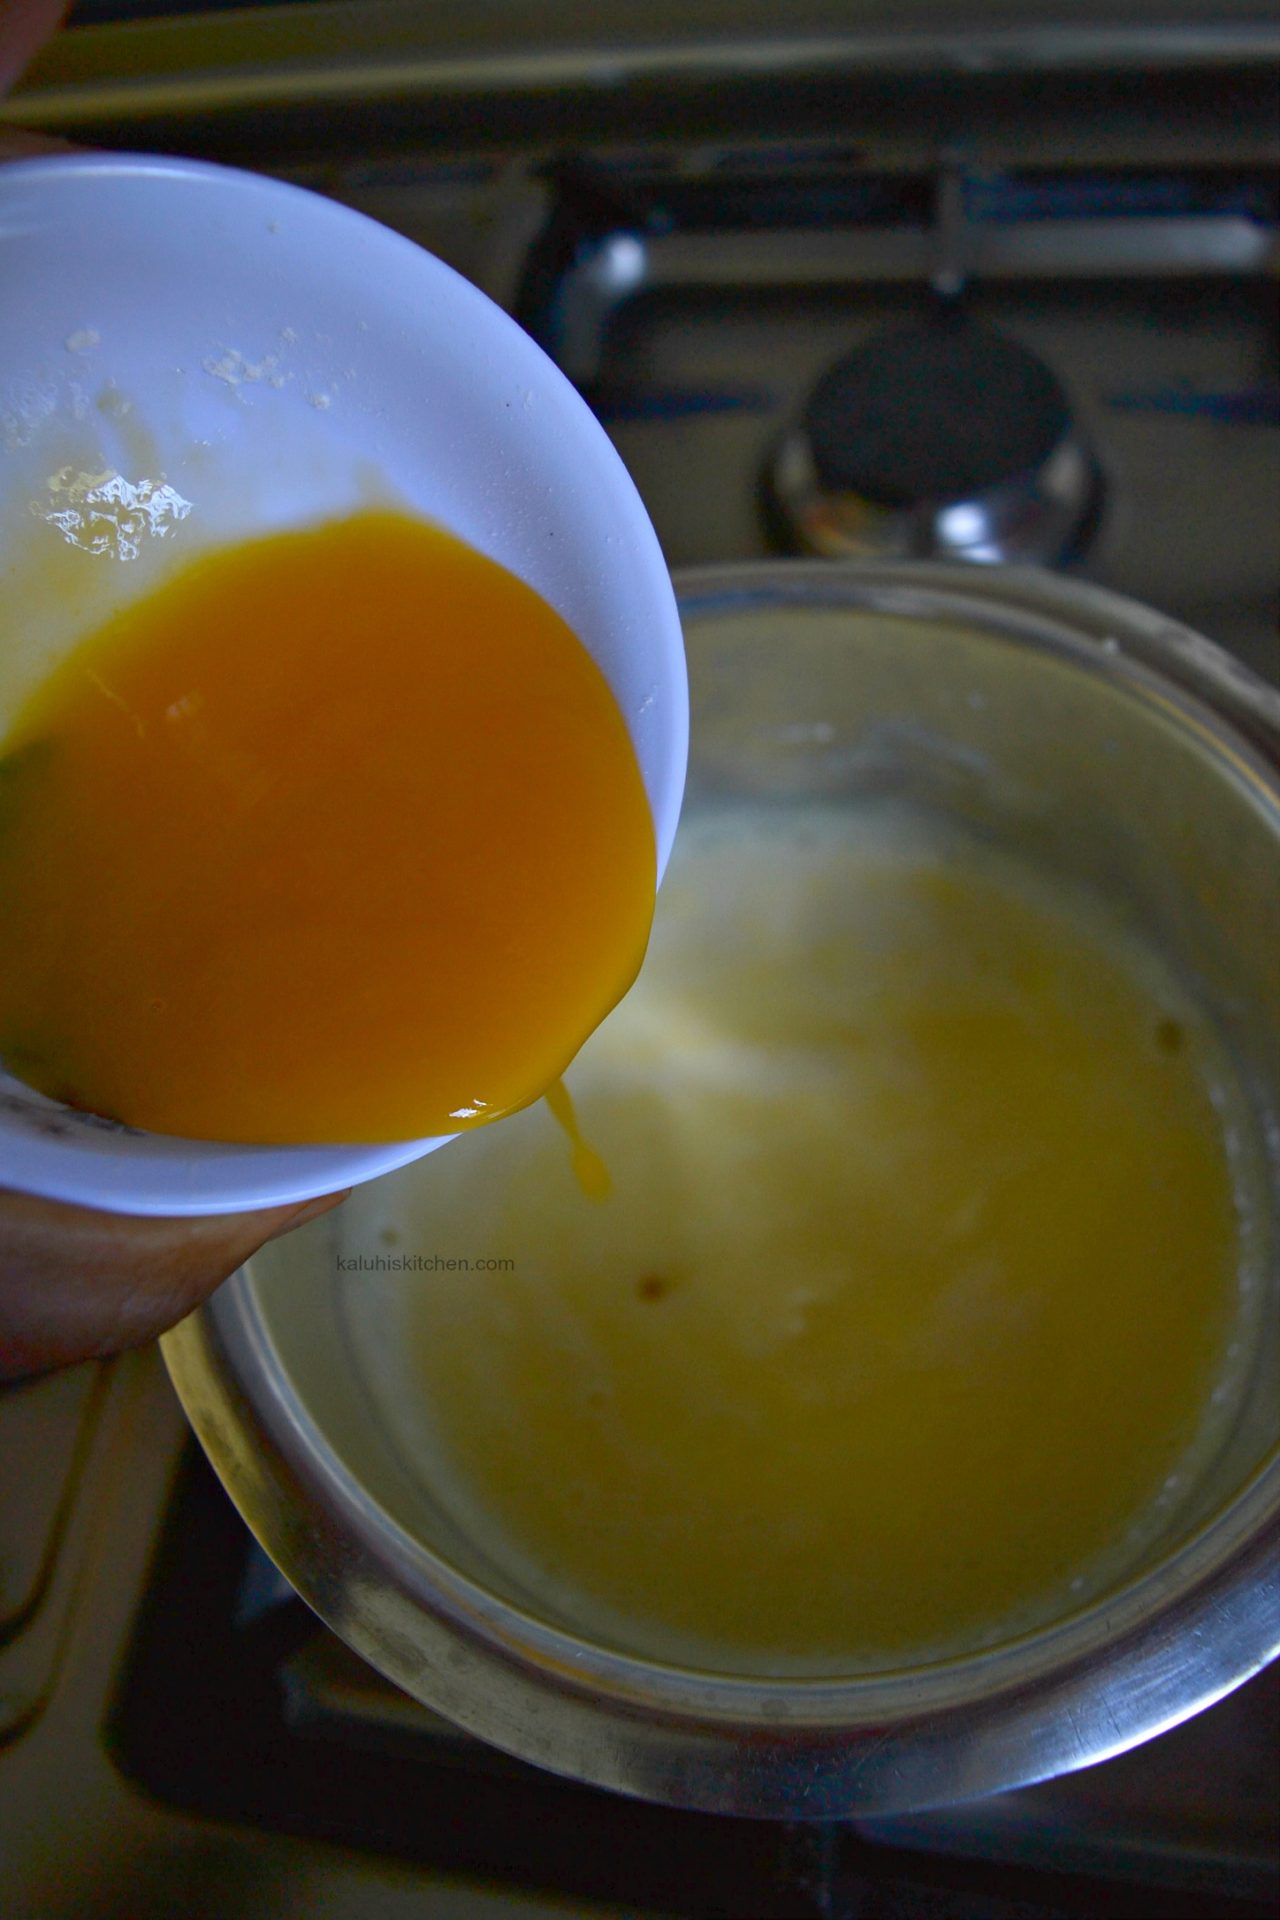 add the pureed greem mango pulp to the cream and sugar and allow it to cool down slightly_greem amngo posset ingredients_kaluhiskitchen.com